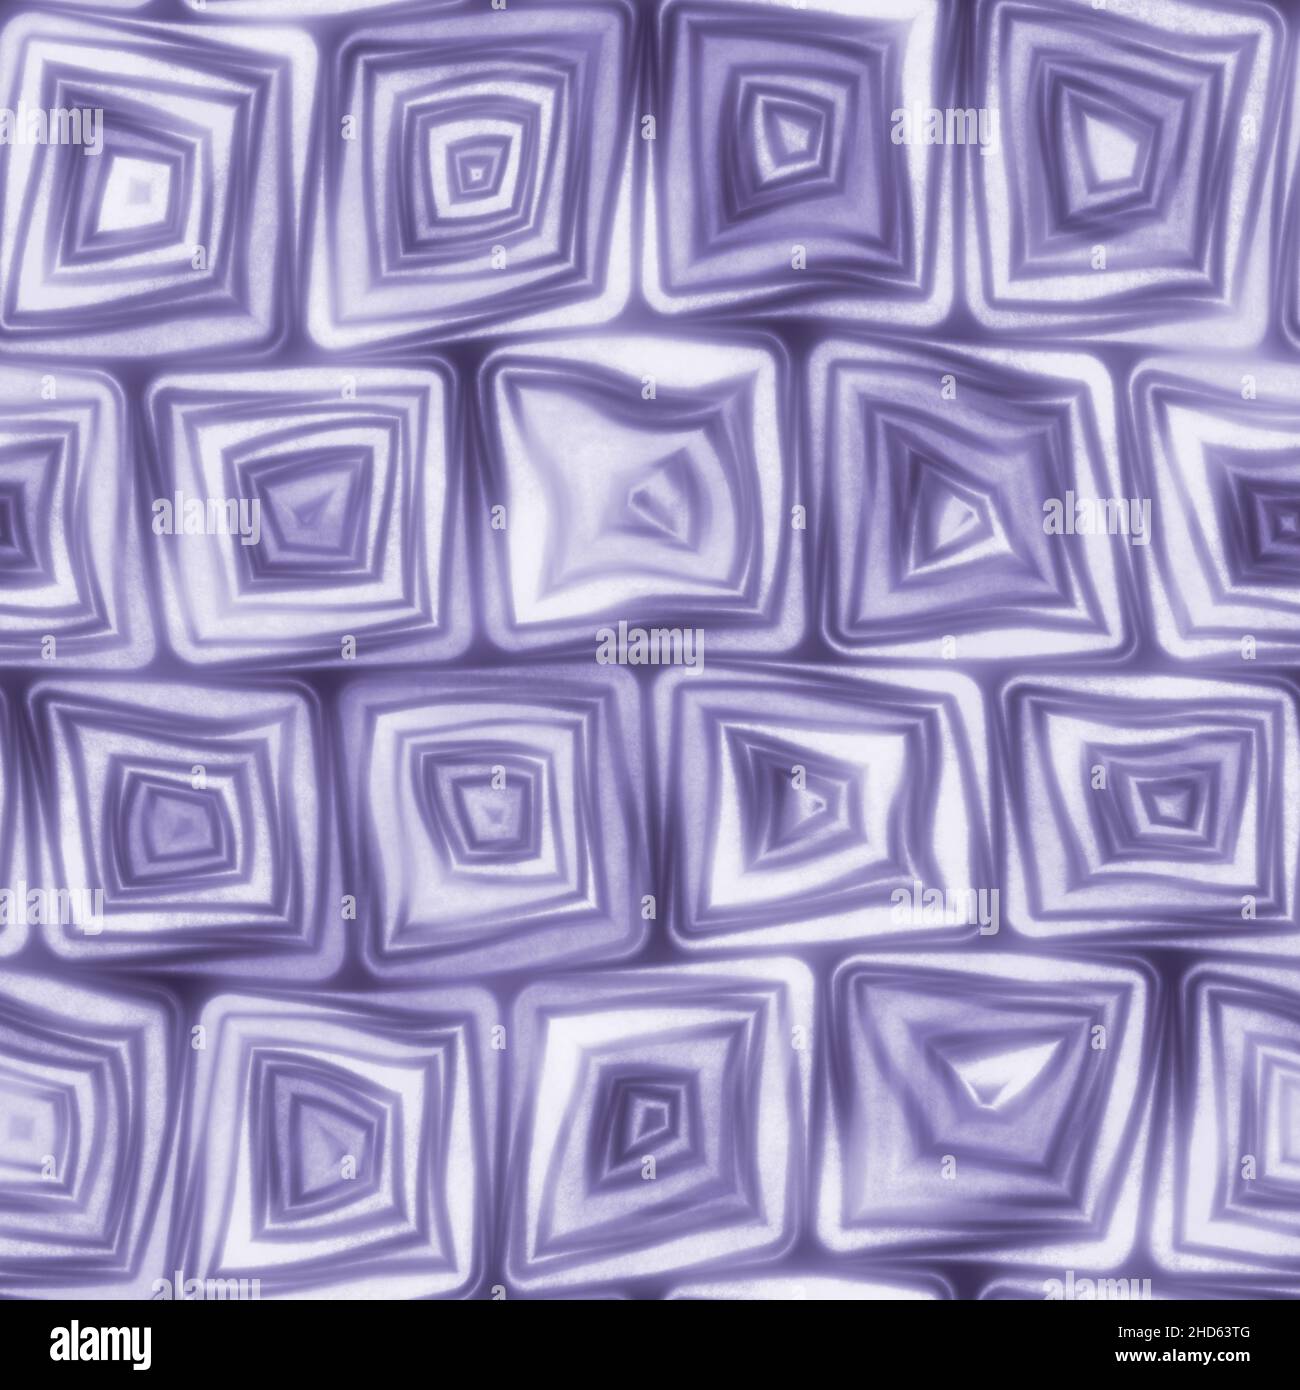 Large Purple Lavender Lilac Squiggly Swirly Spiral Squares Seamless Texture Pattern Stock Photo